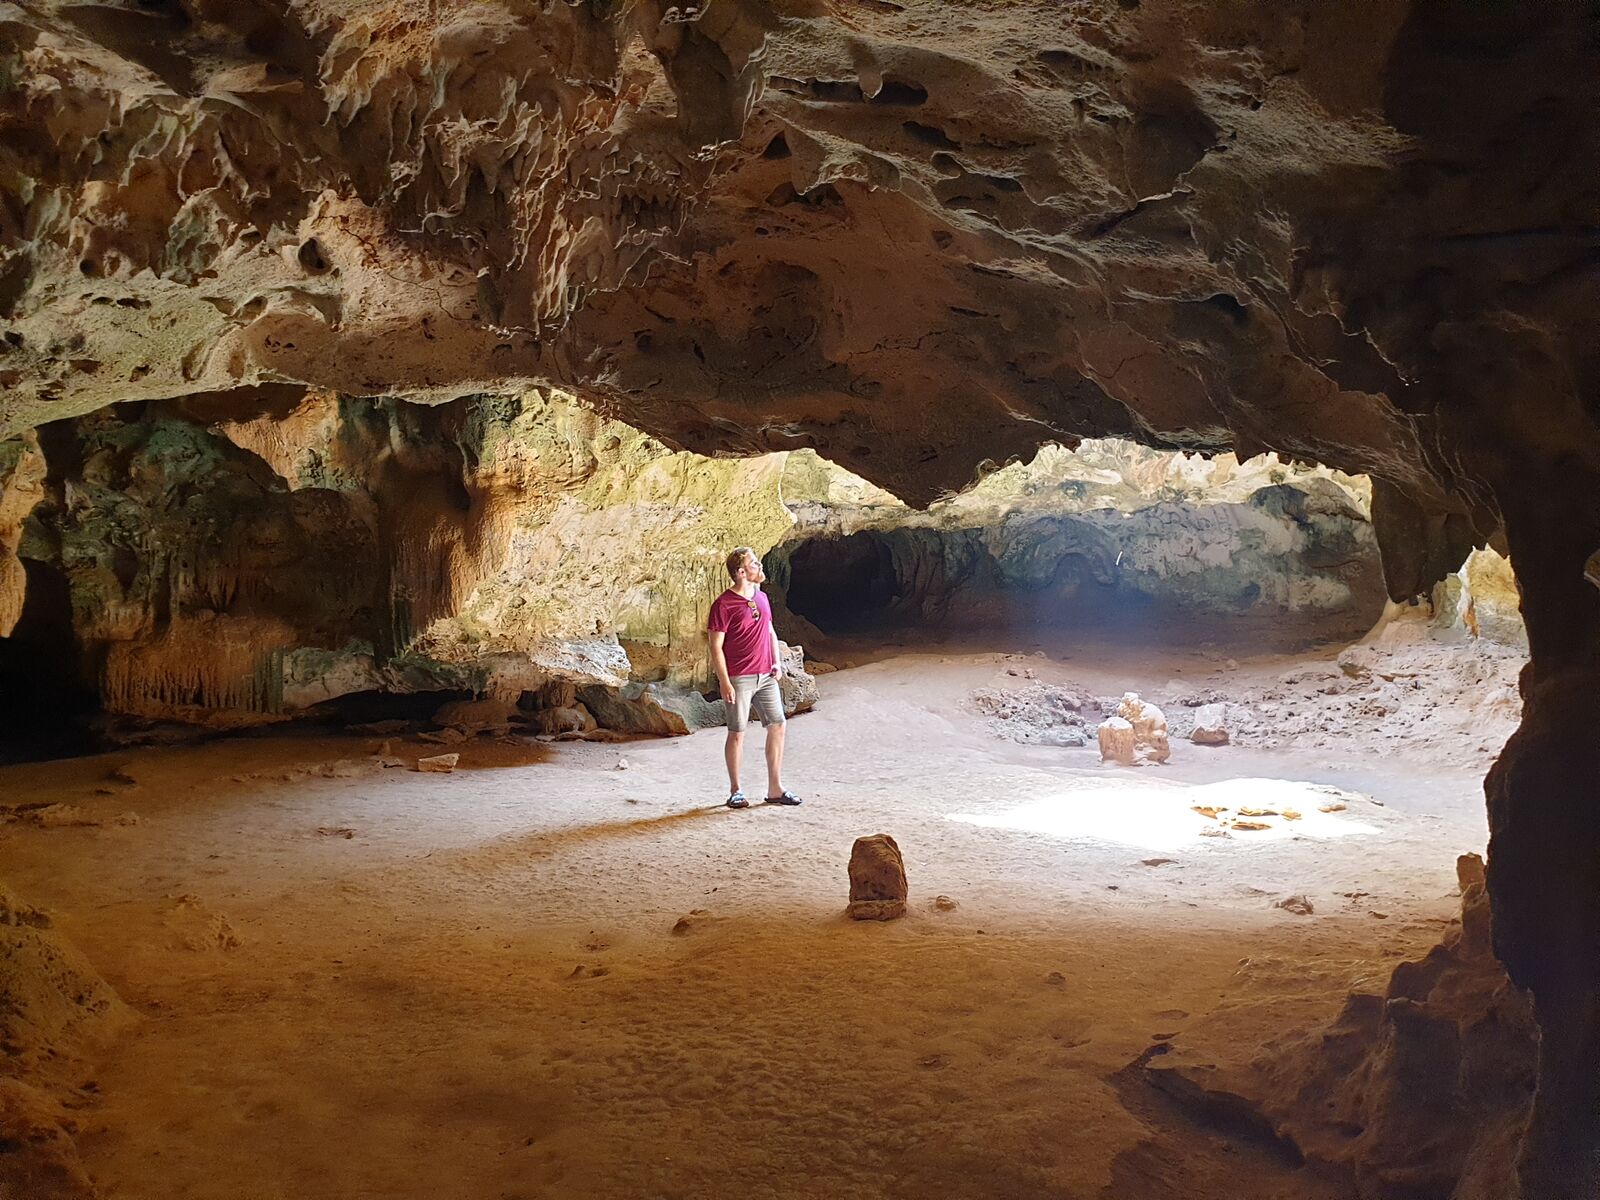 In the east of the island, there are a few spacious caves.